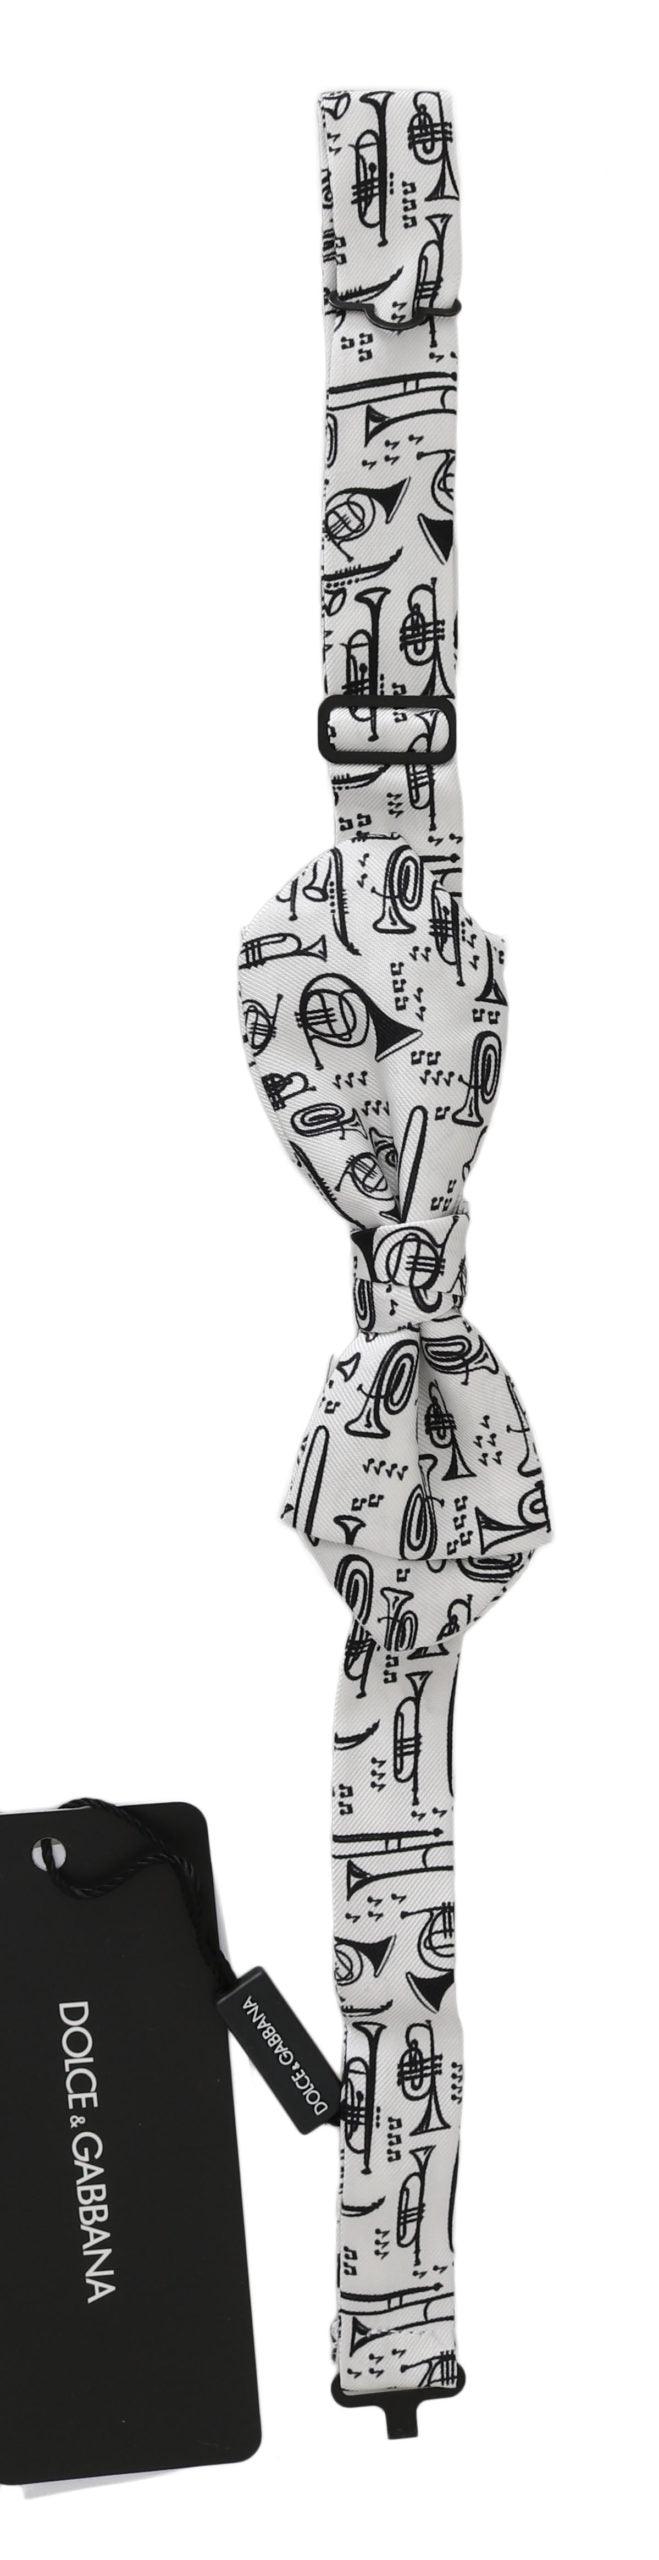 White Instruments Adjustable Neck Papillon Men Bow Tie designed by Dolce & Gabbana available from Moon Behind The Hill's Men's Accessories range